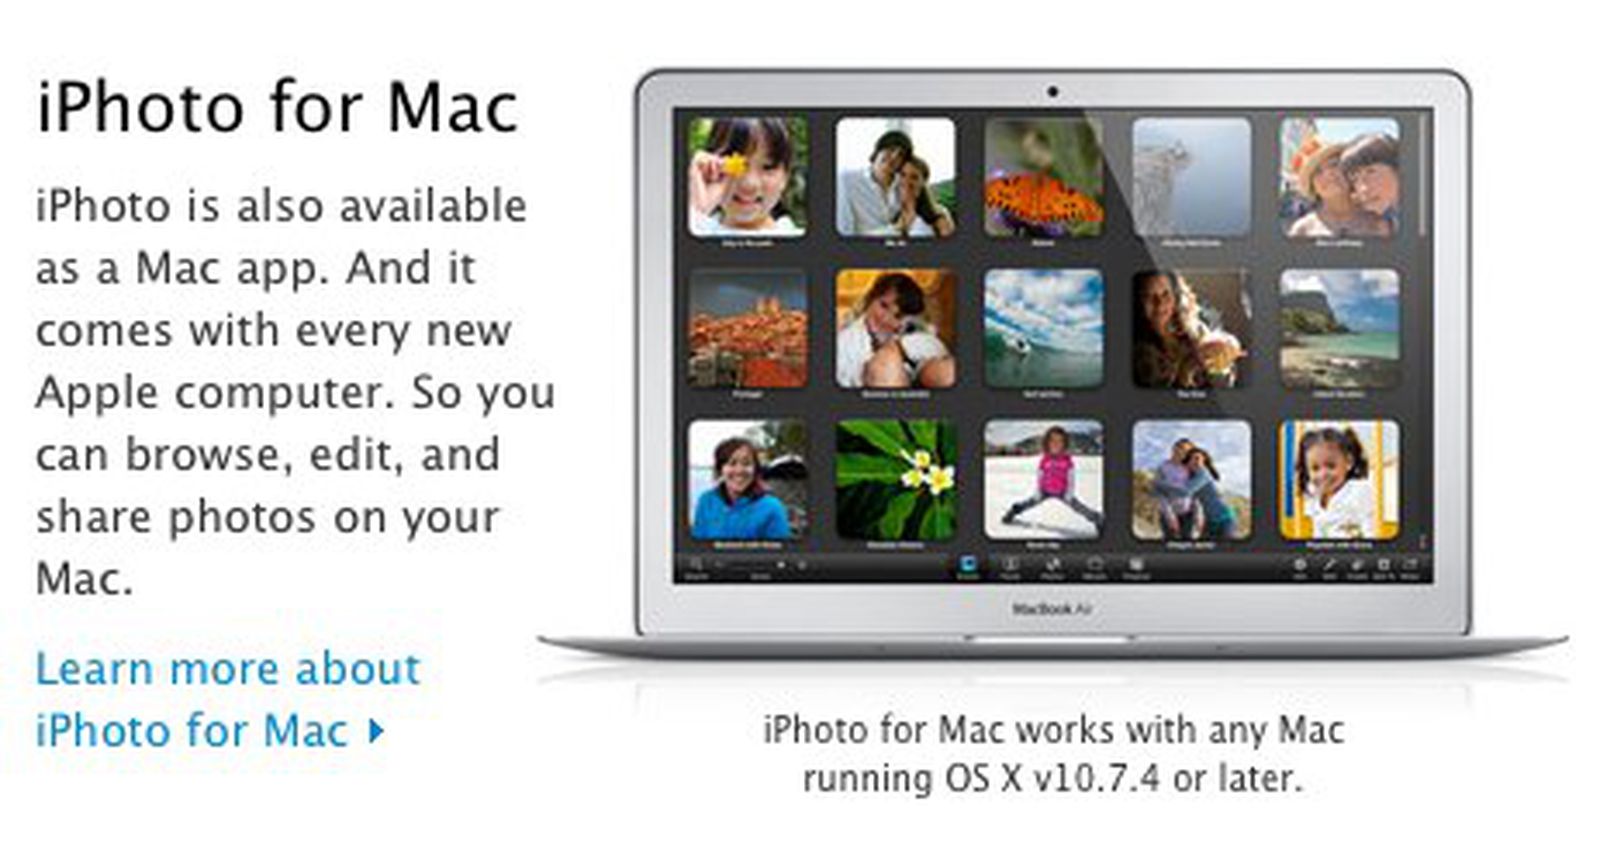 what is the latest version of iphoto for mac